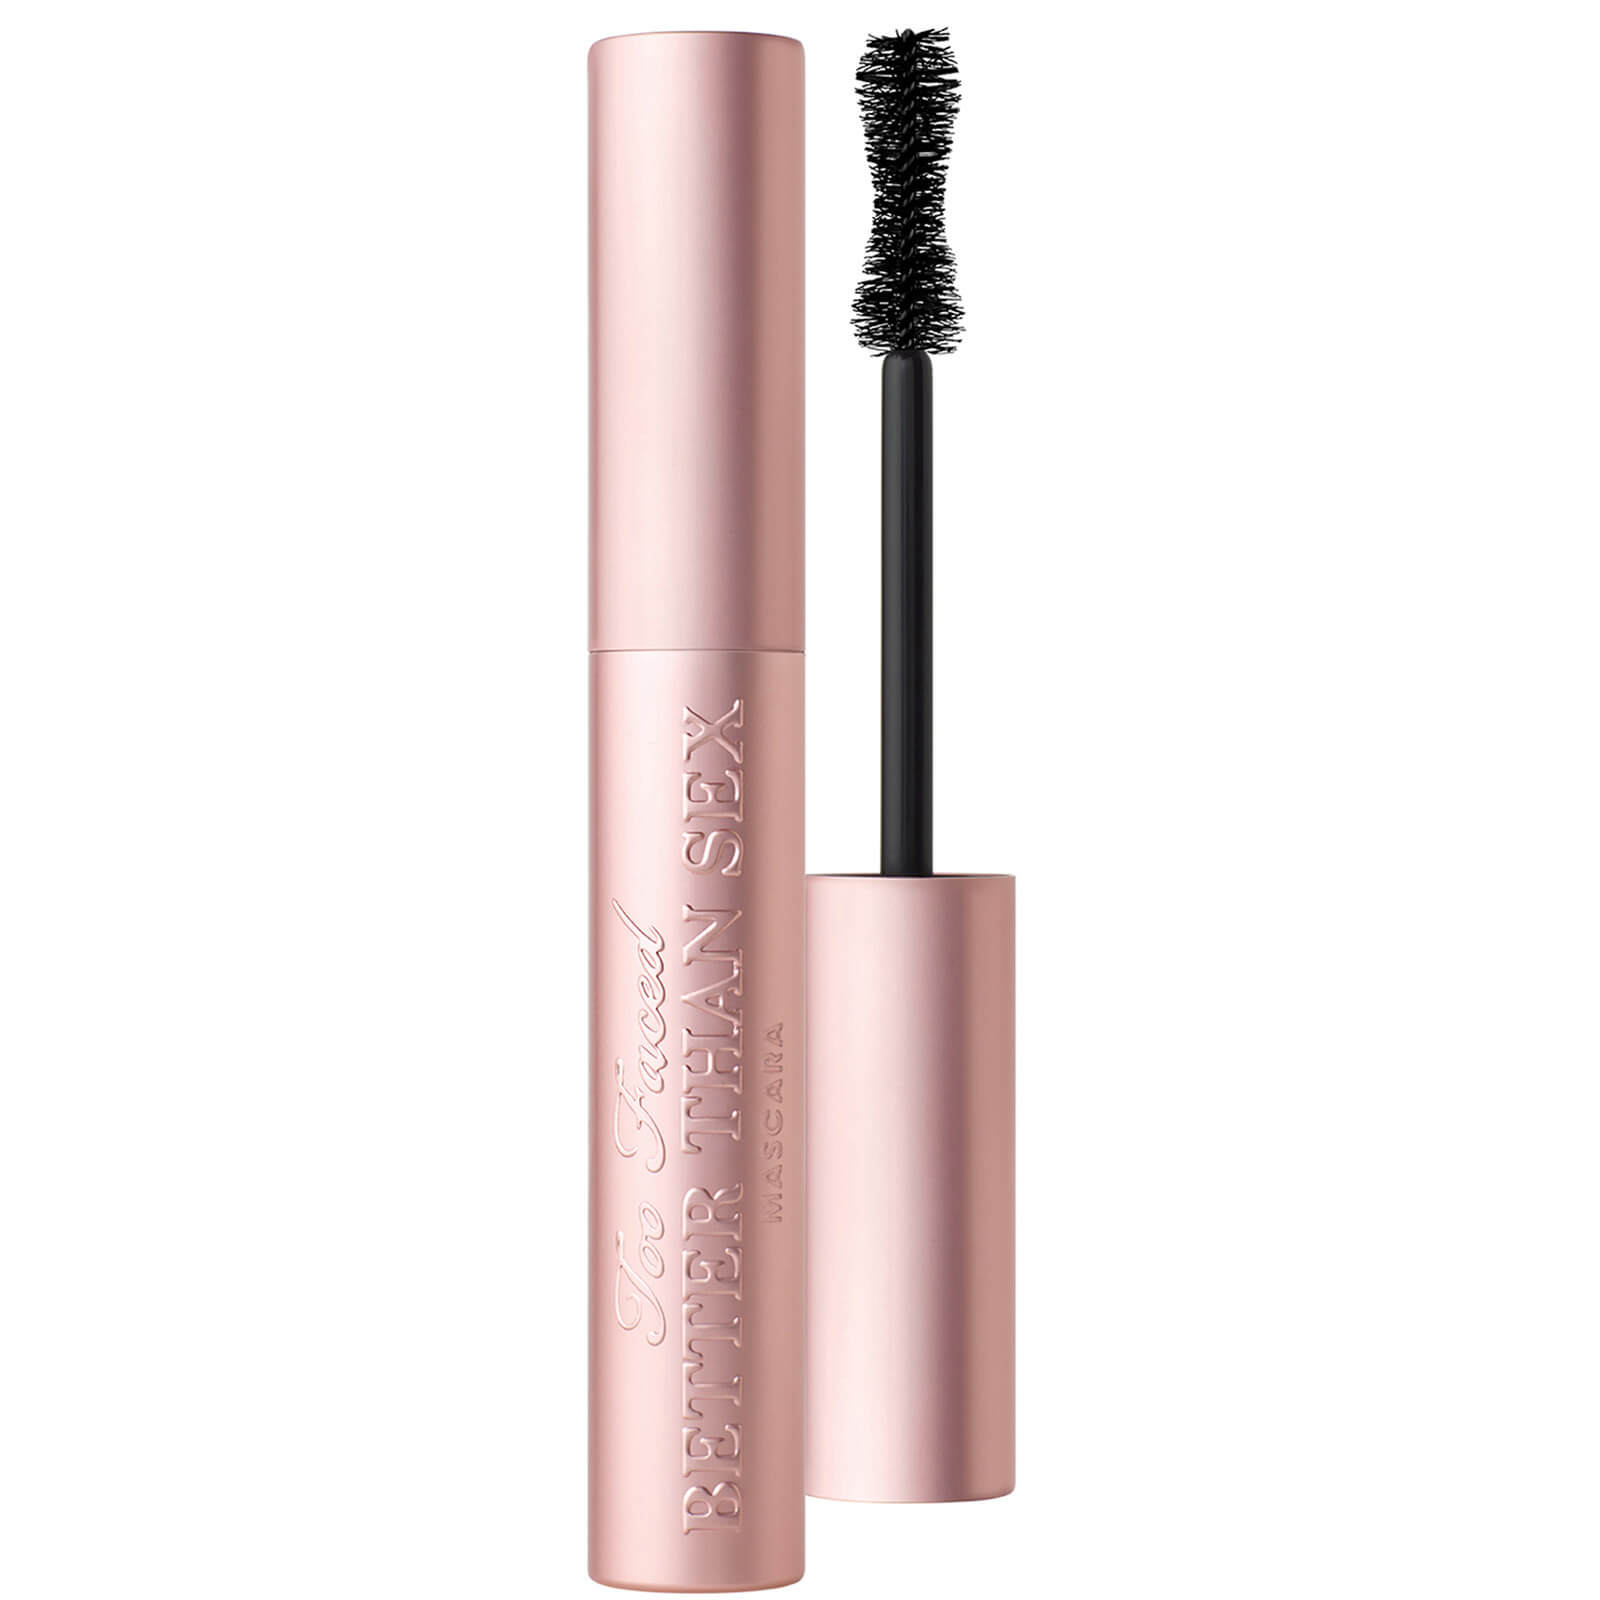 Image of Too Faced Better Than Sex Mascara 8ml